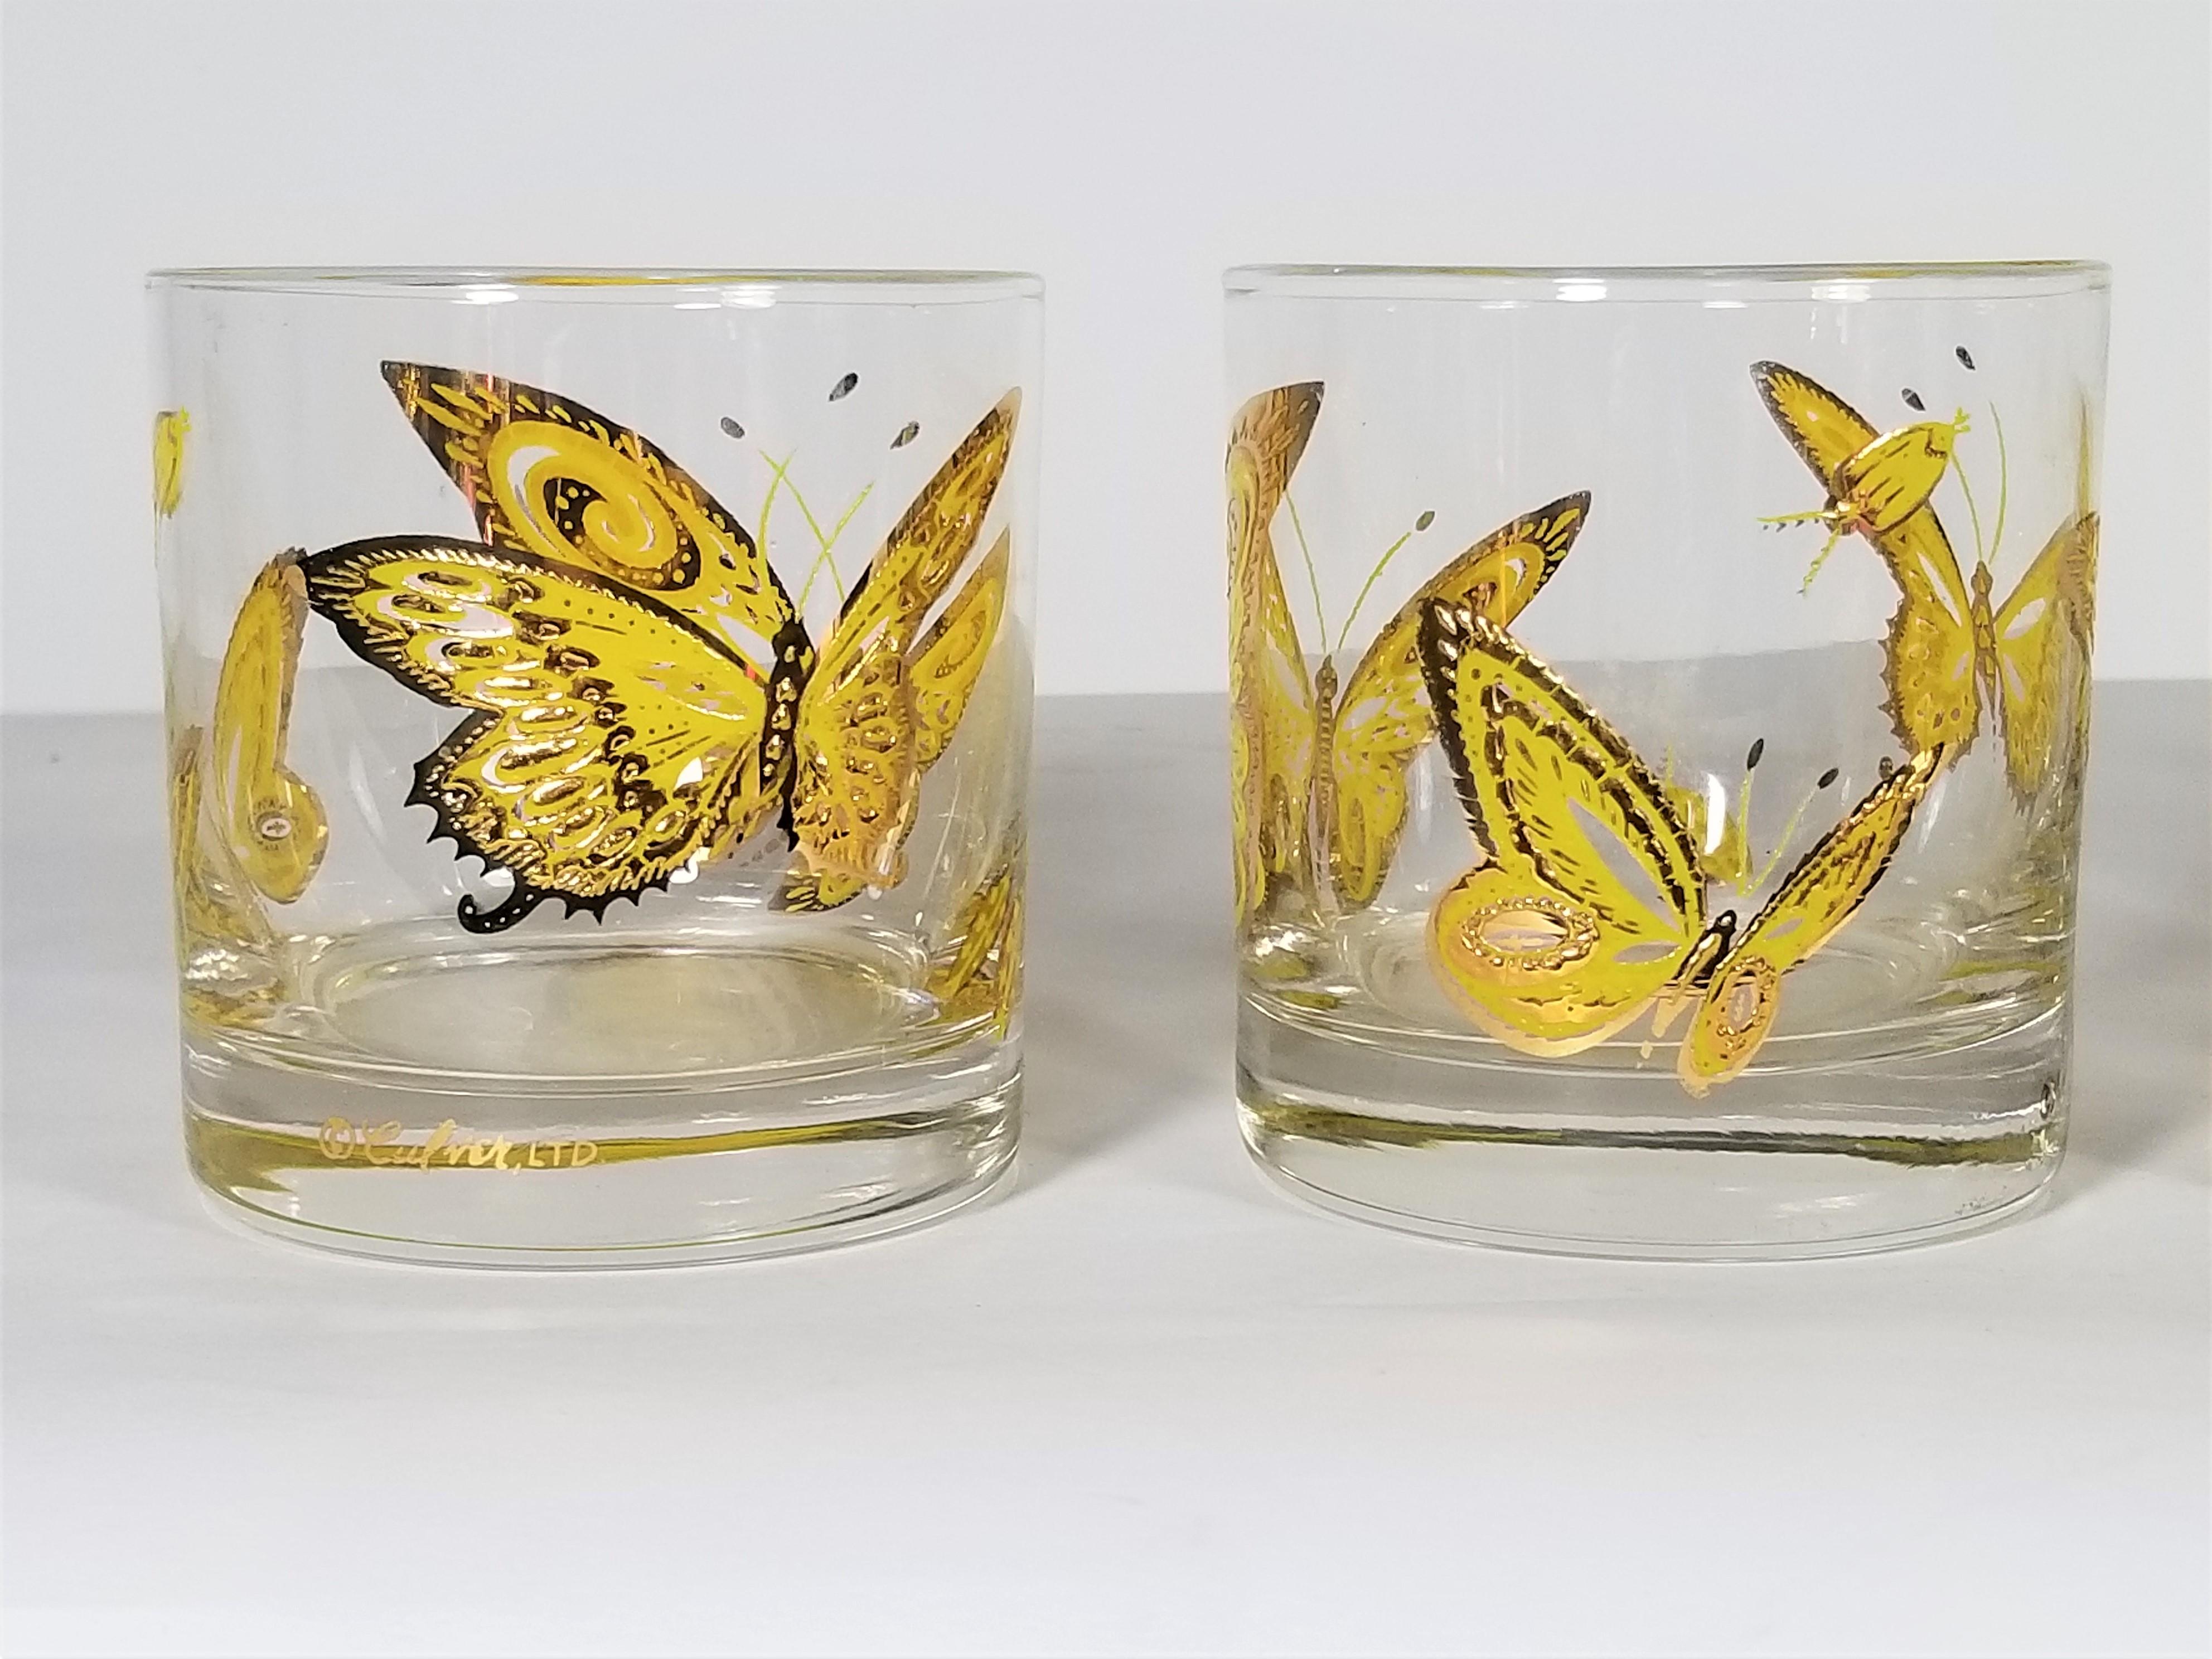 Culver 22-Karat Gold 1960s Midcentury Barware or Glassware In Excellent Condition For Sale In New York, NY